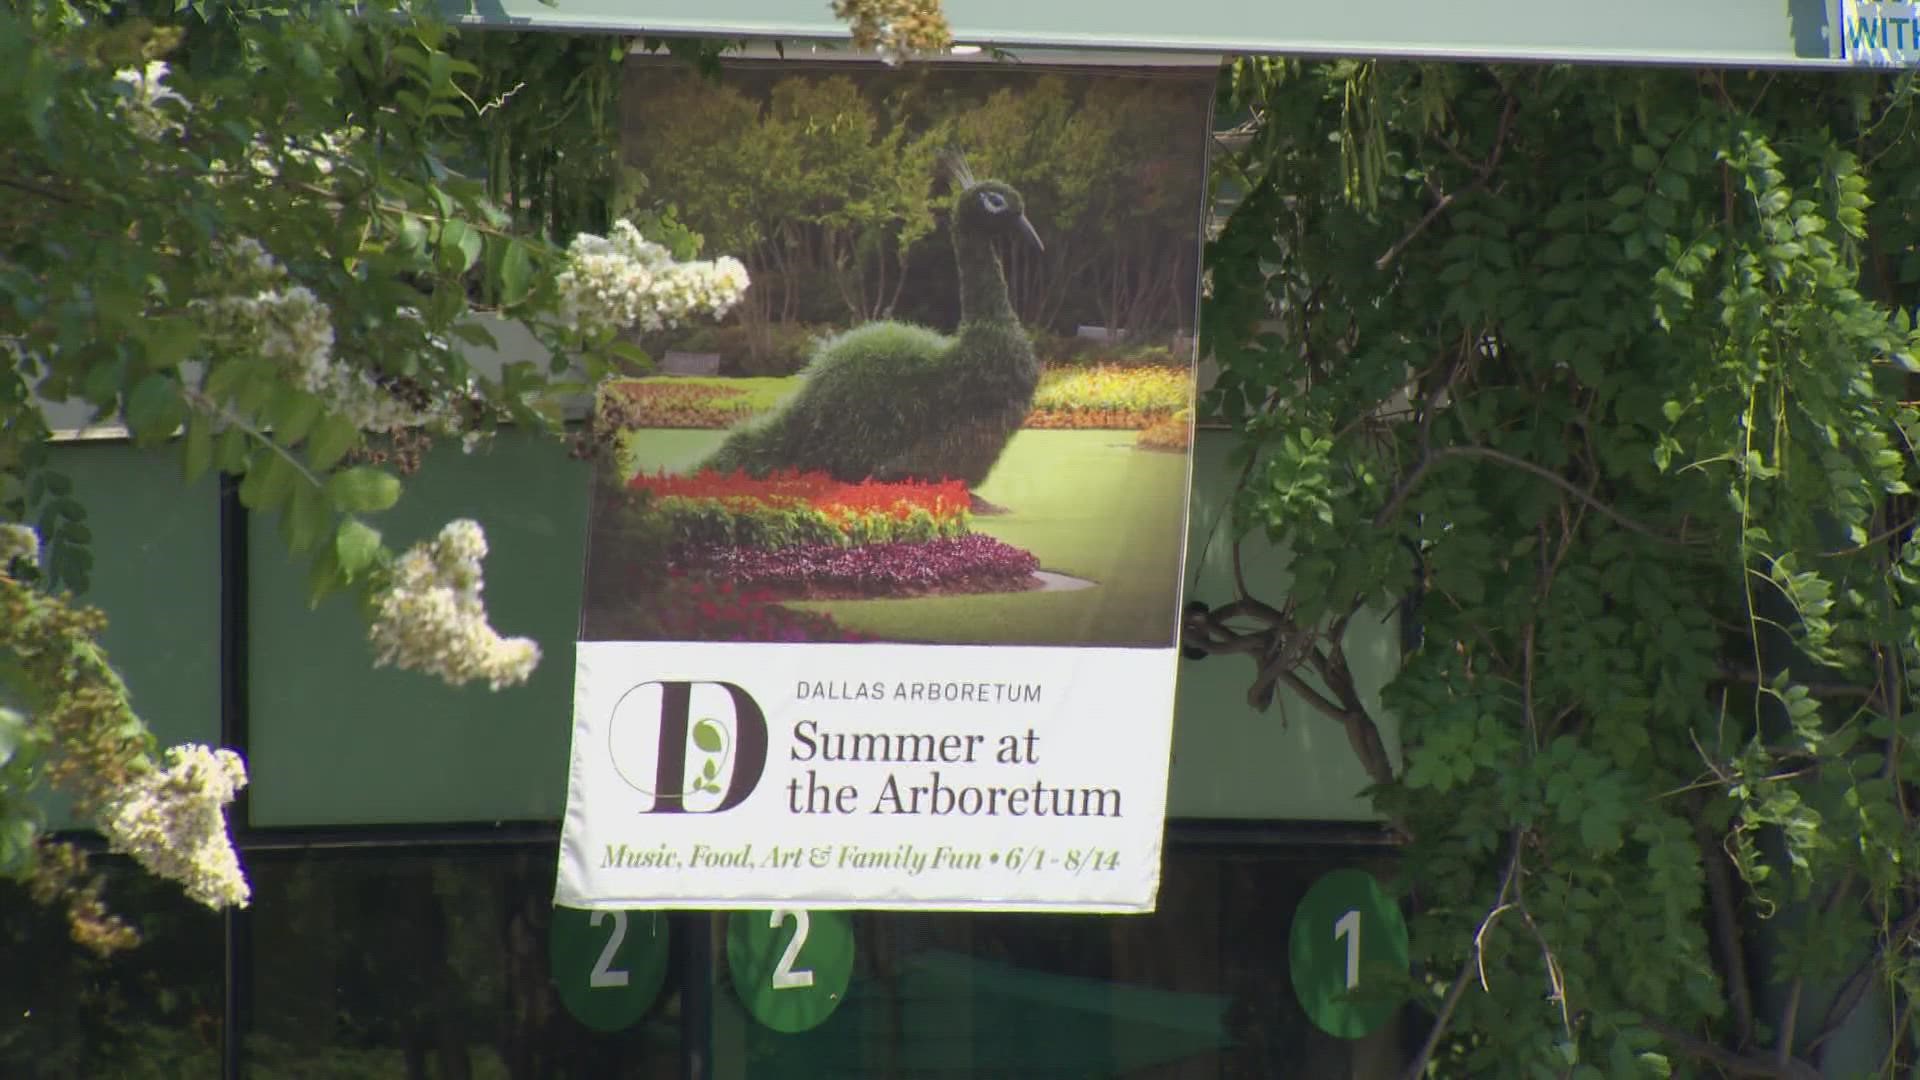 In the past several months at least three Equal Employment Opportunity Commission complaints have been filed against the arboretum.